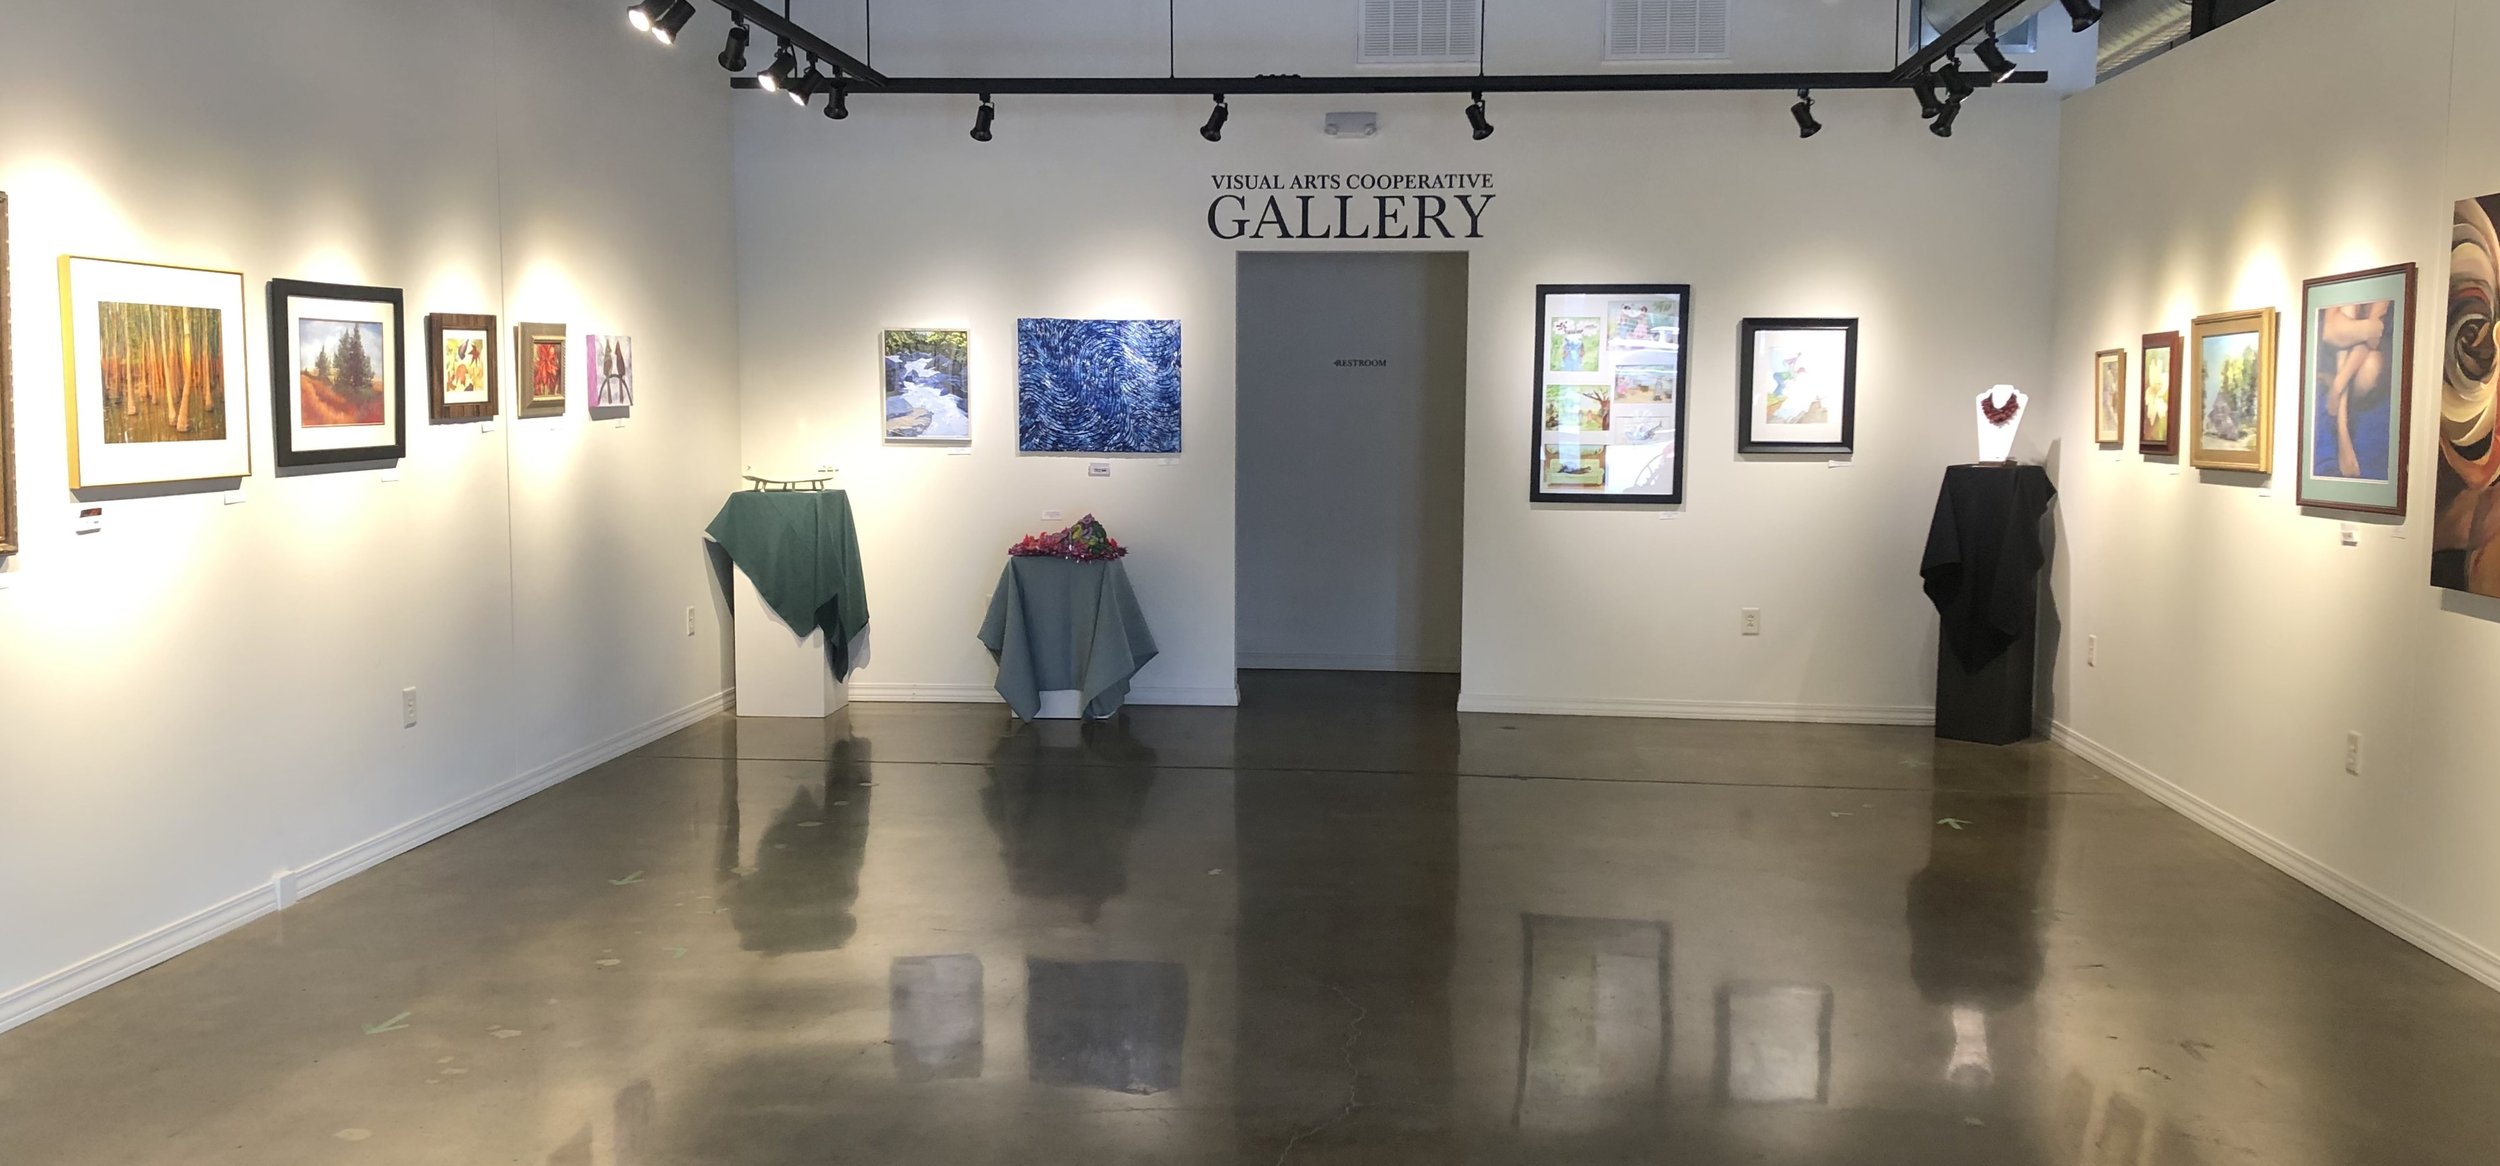 Visual Arts Cooperative Gallery East View